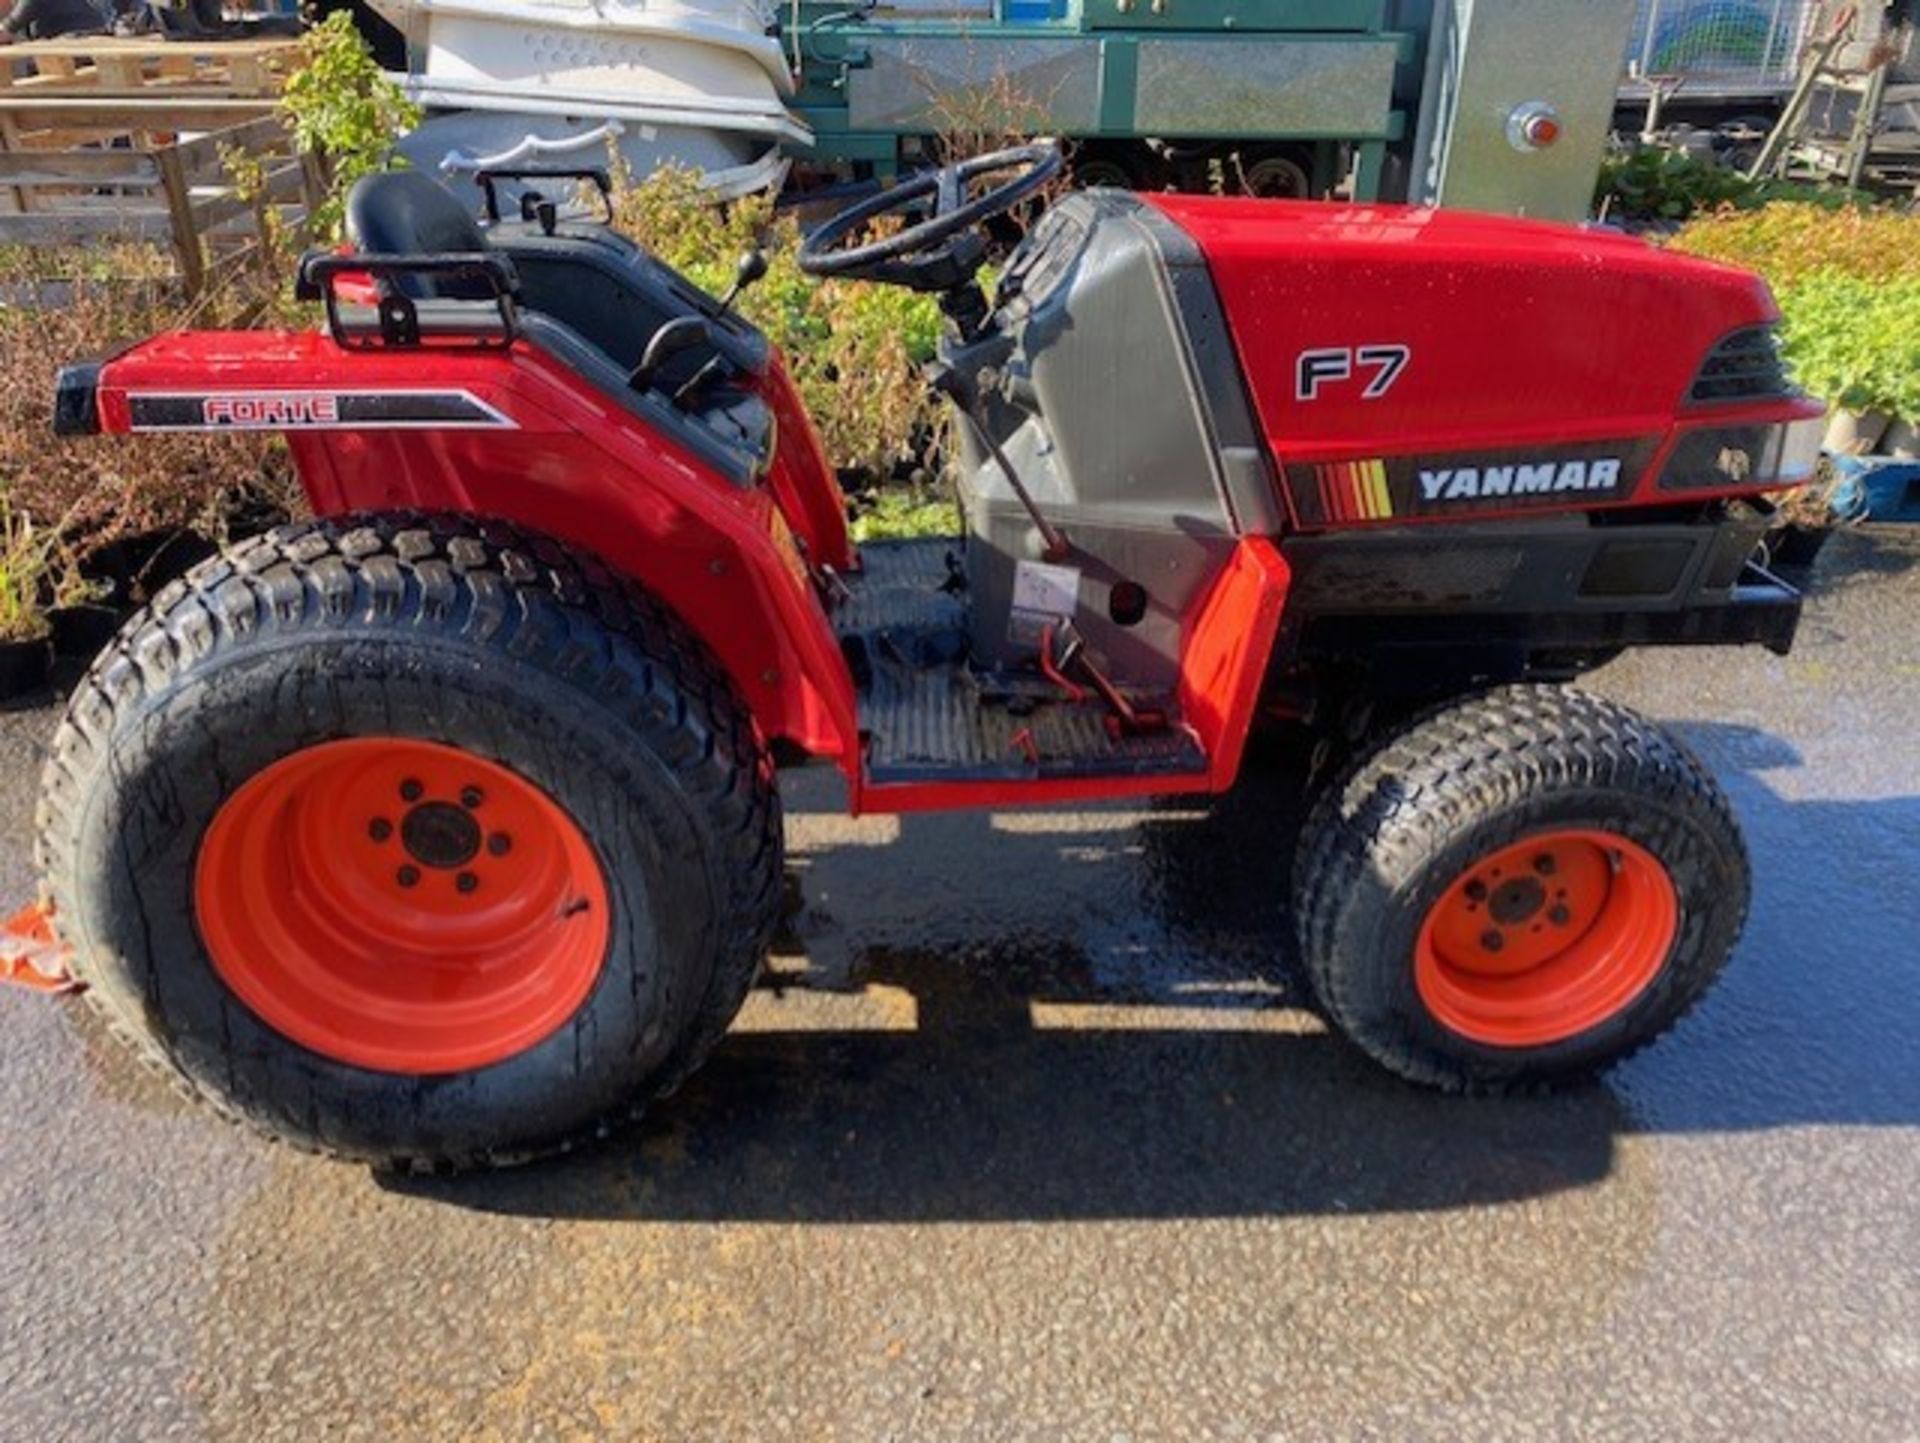 Yanmar compact tractor ready to put to work it is the F7 model 16.5 hp 4wd with differential lock in